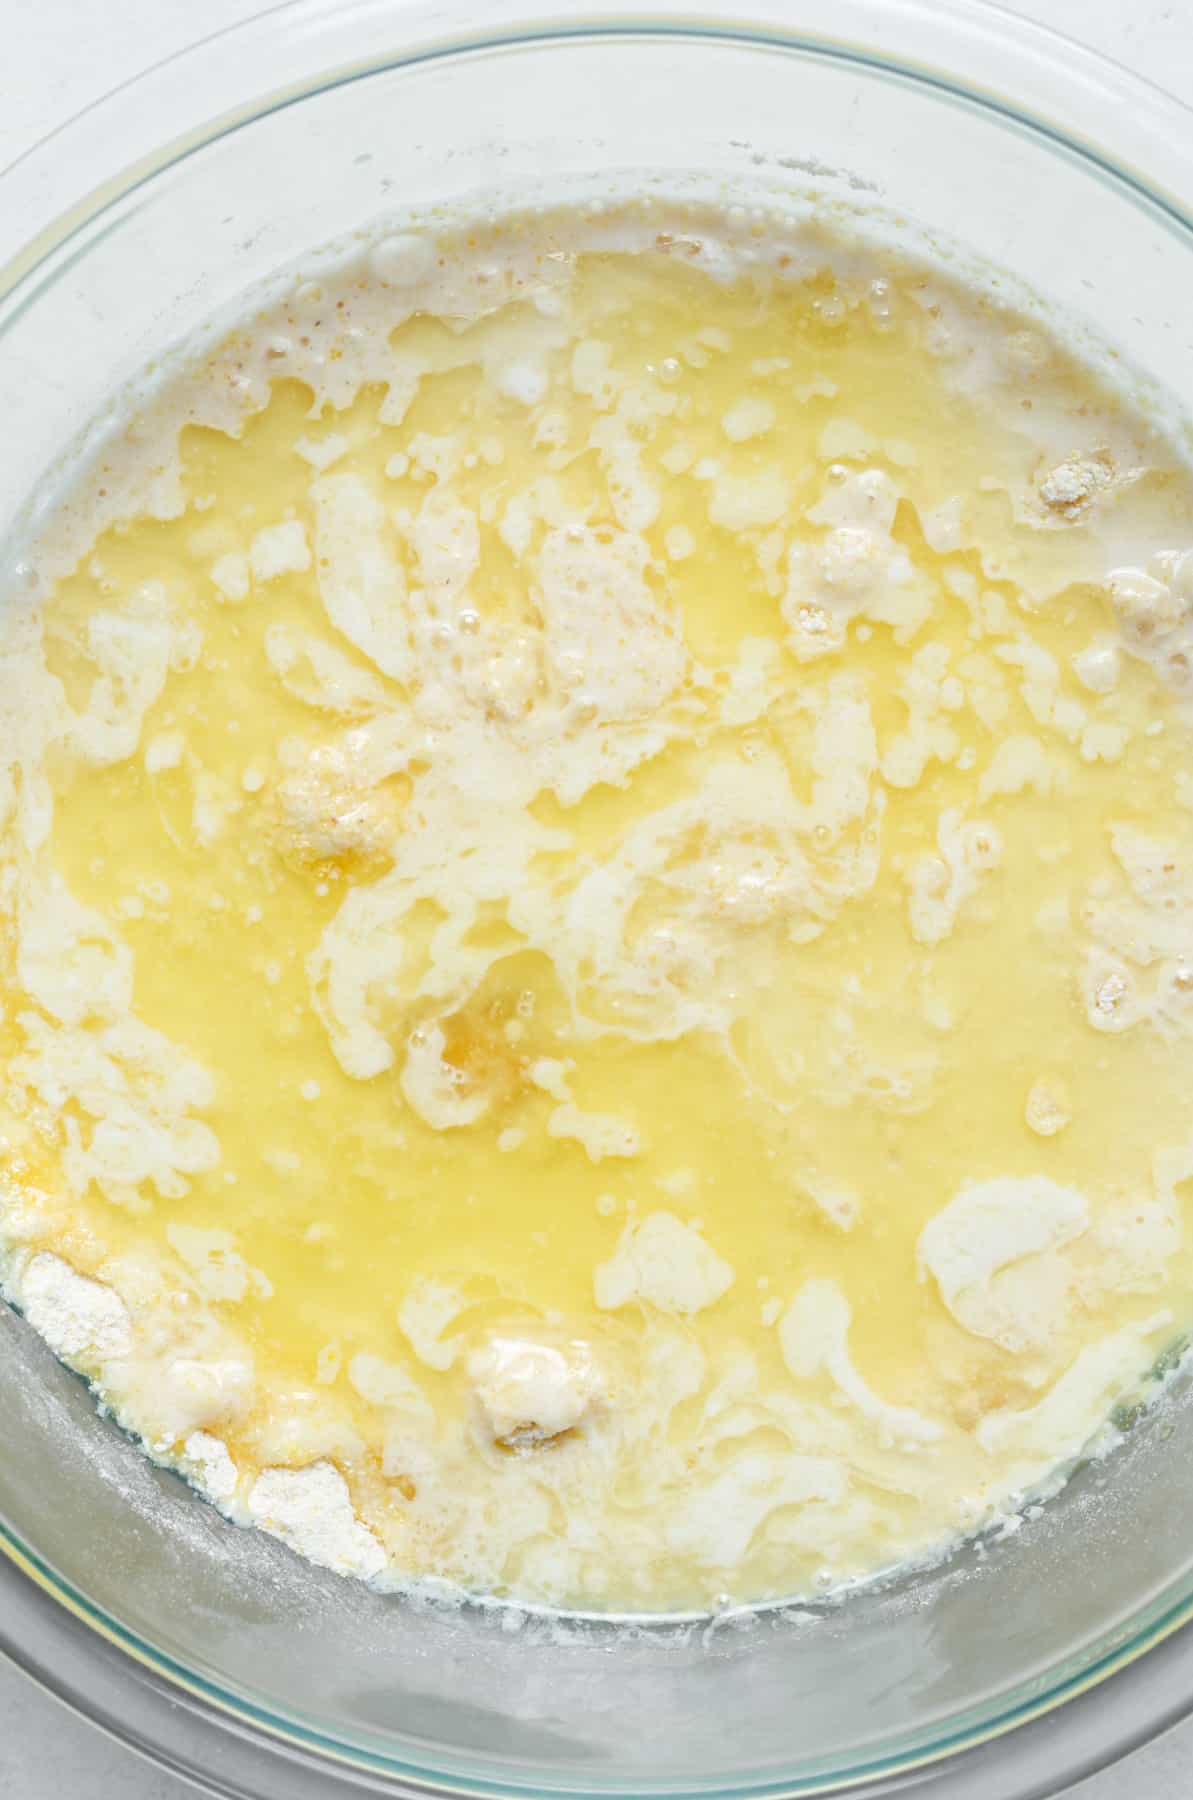 Melted butter and flour in mixing bowl.